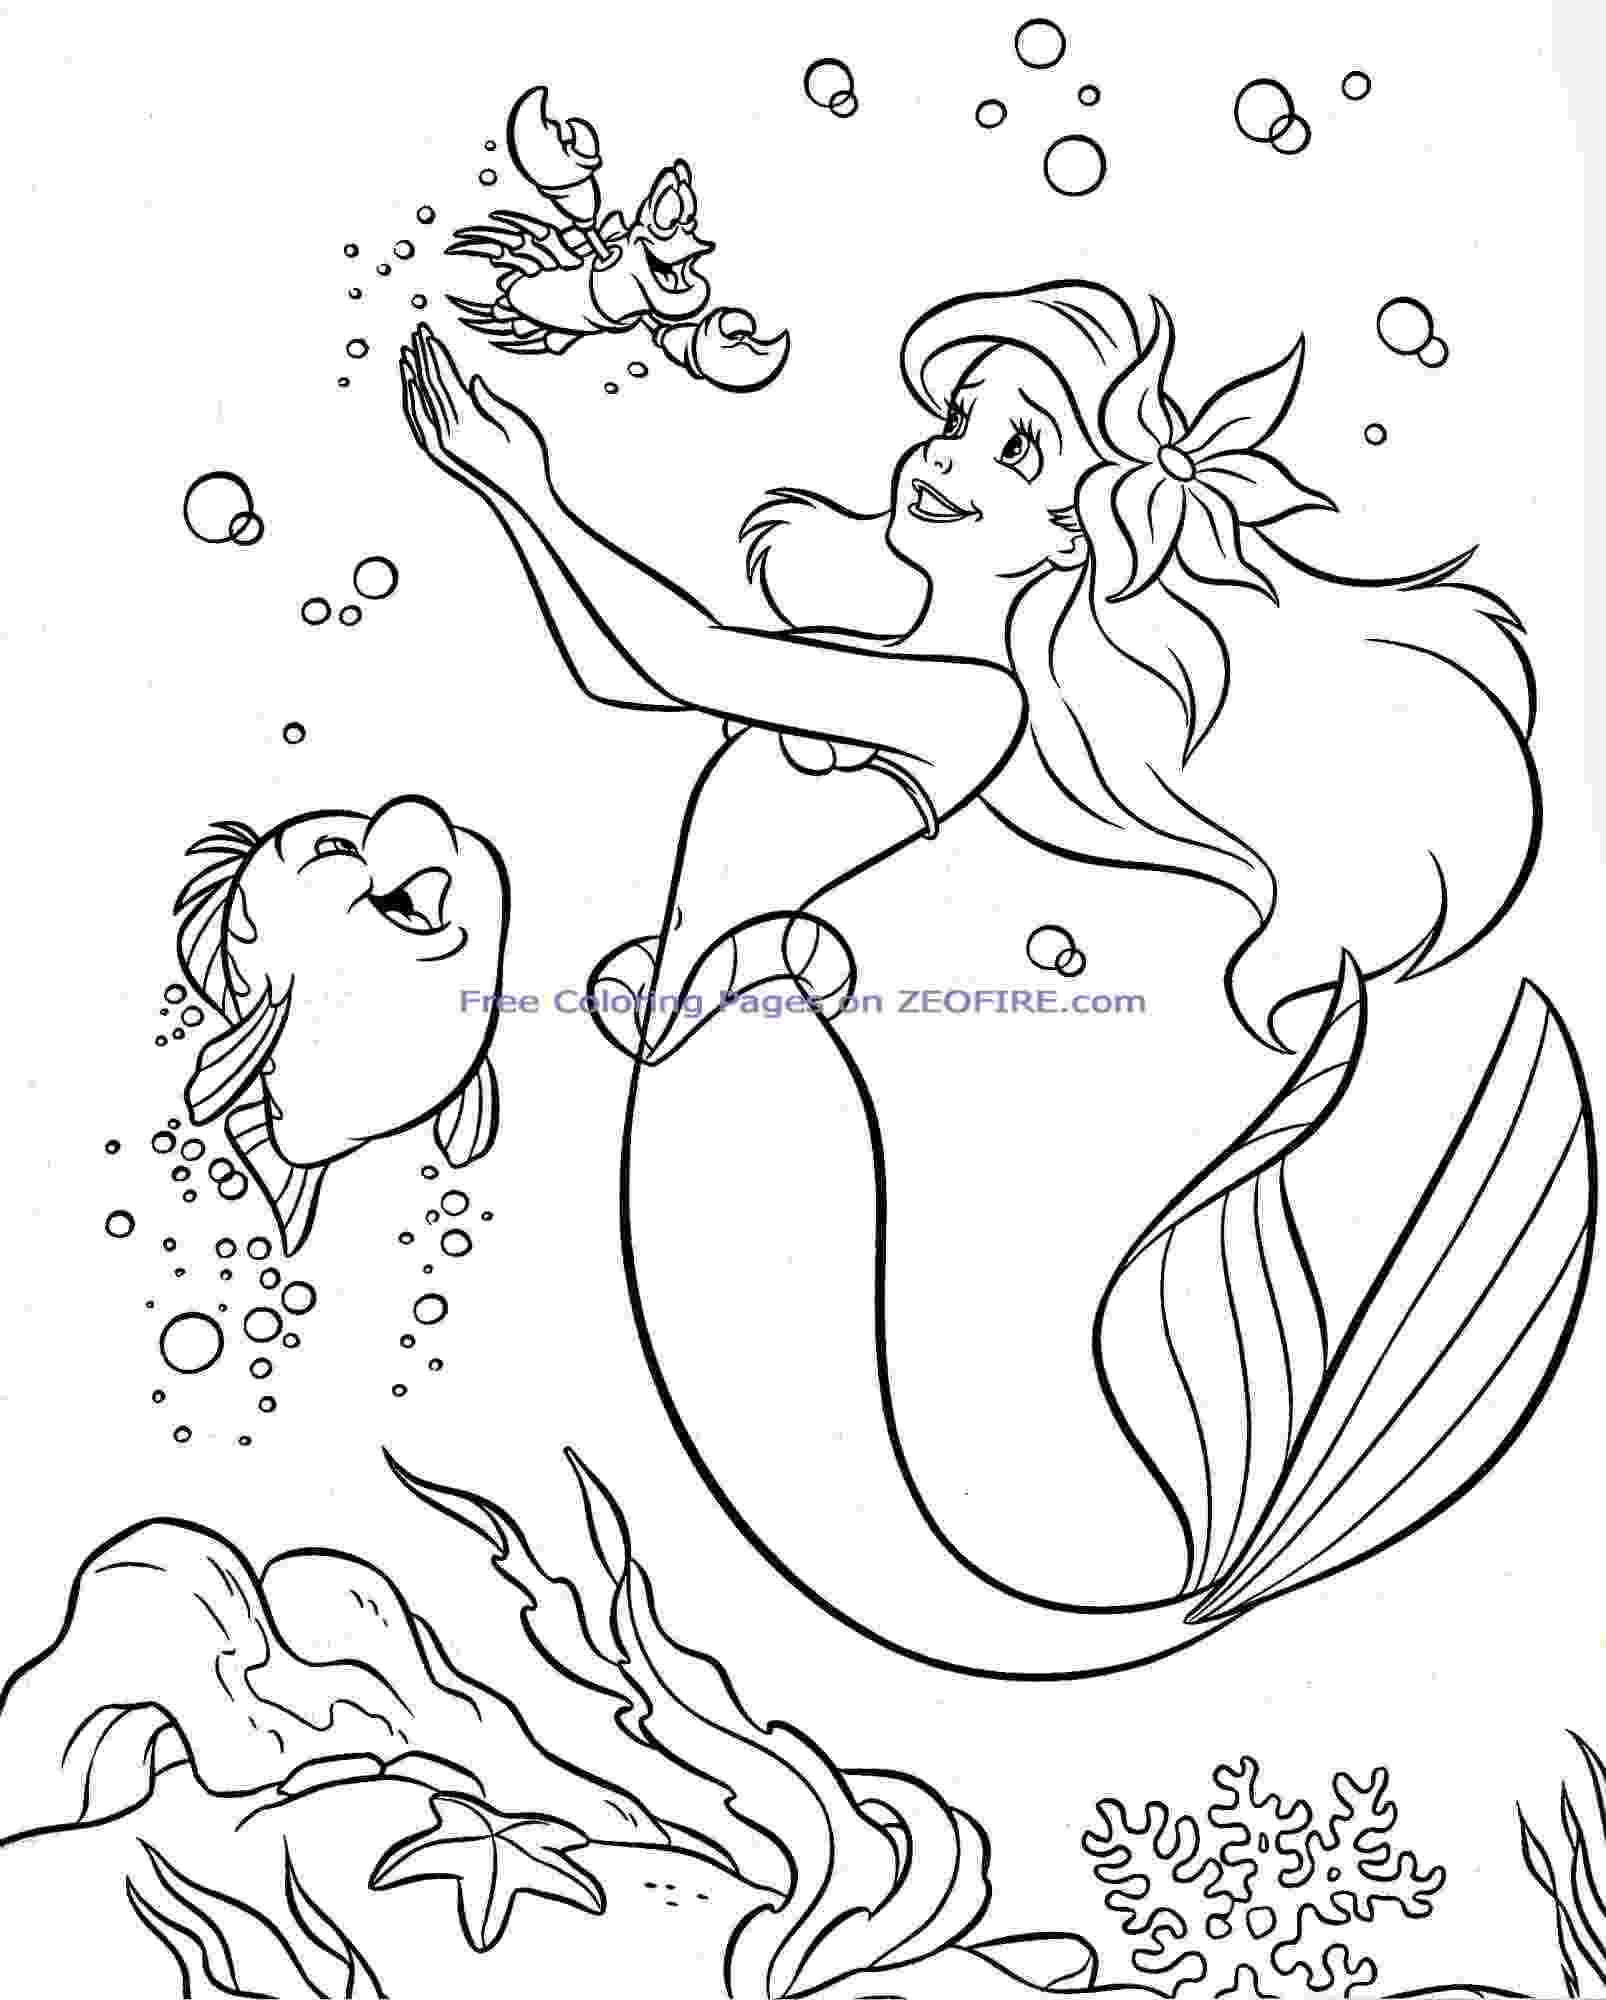 ariel coloring page ariel the little mermaid coloring pages for girls to print ariel coloring page 